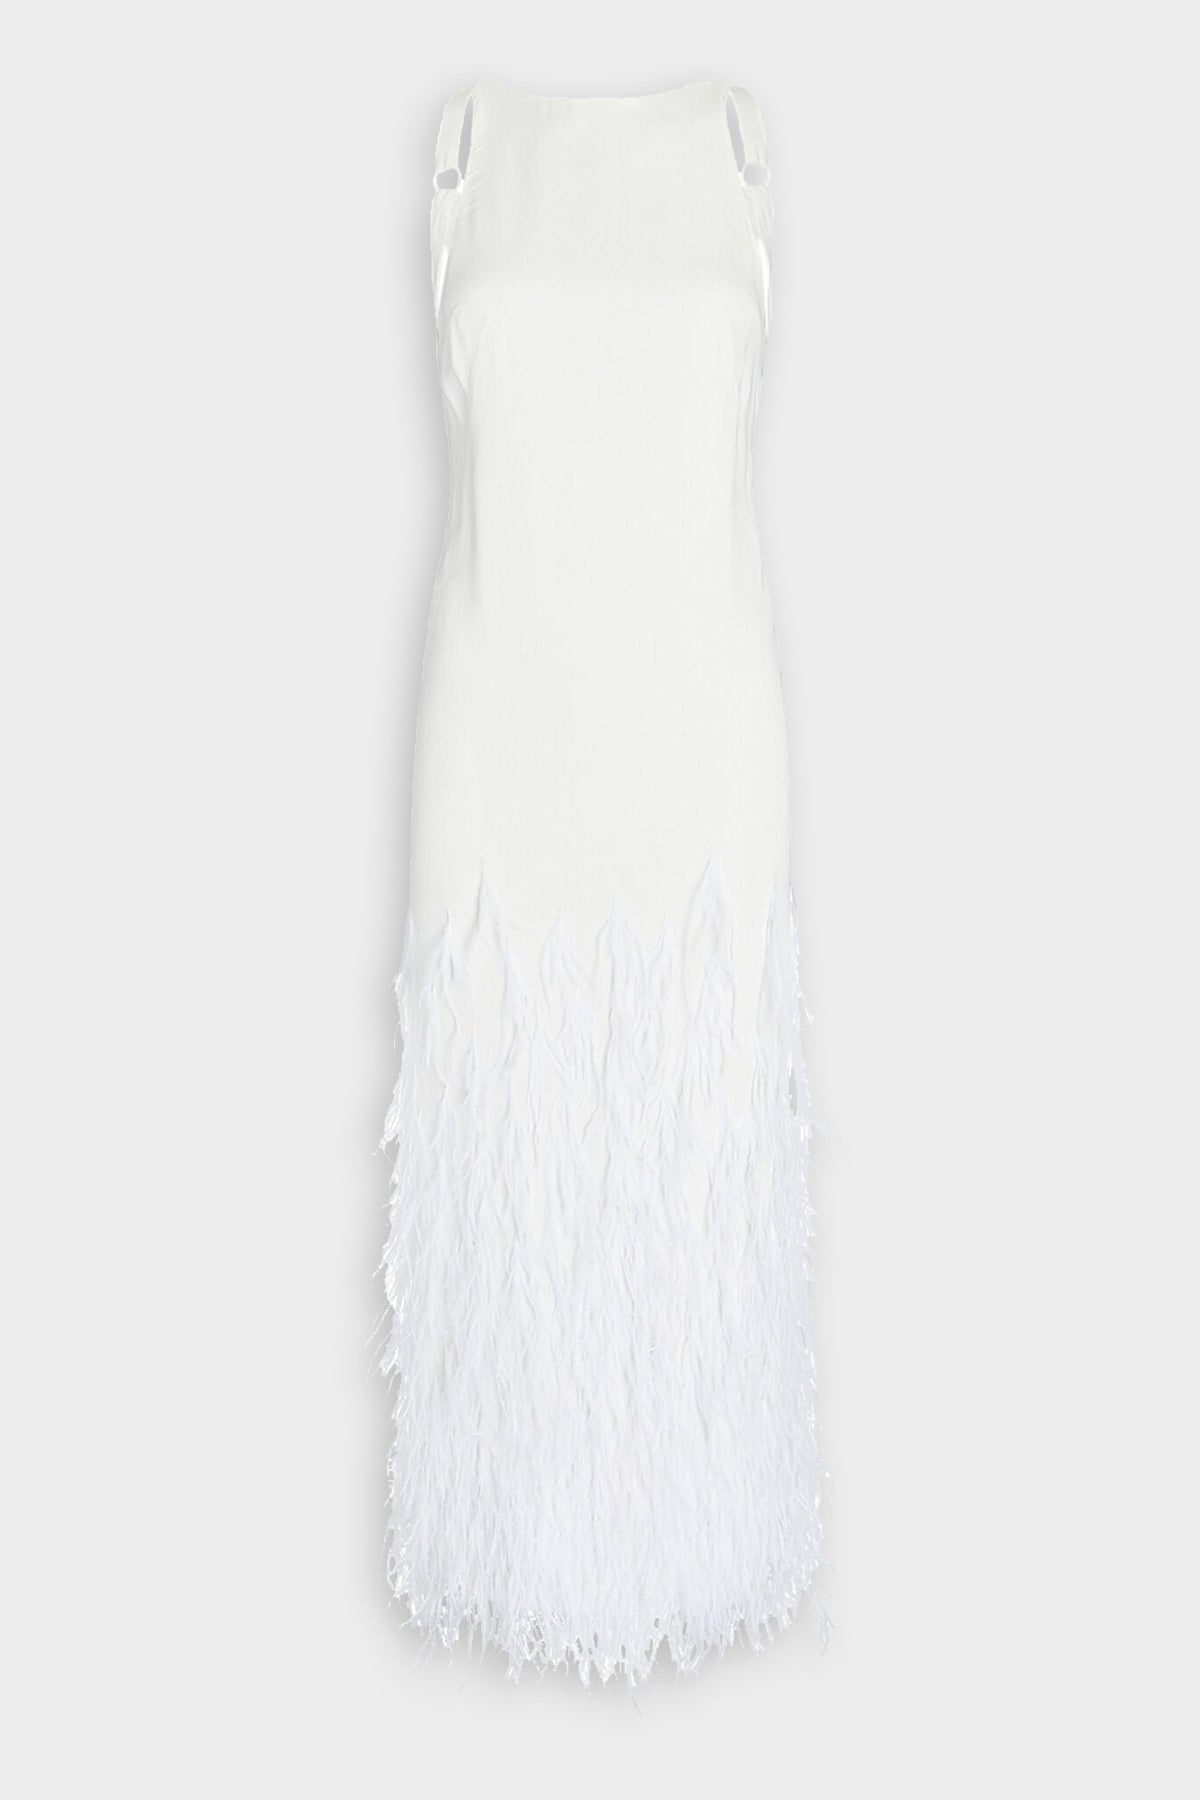 Aja Gown in Off-White - shop-olivia.com